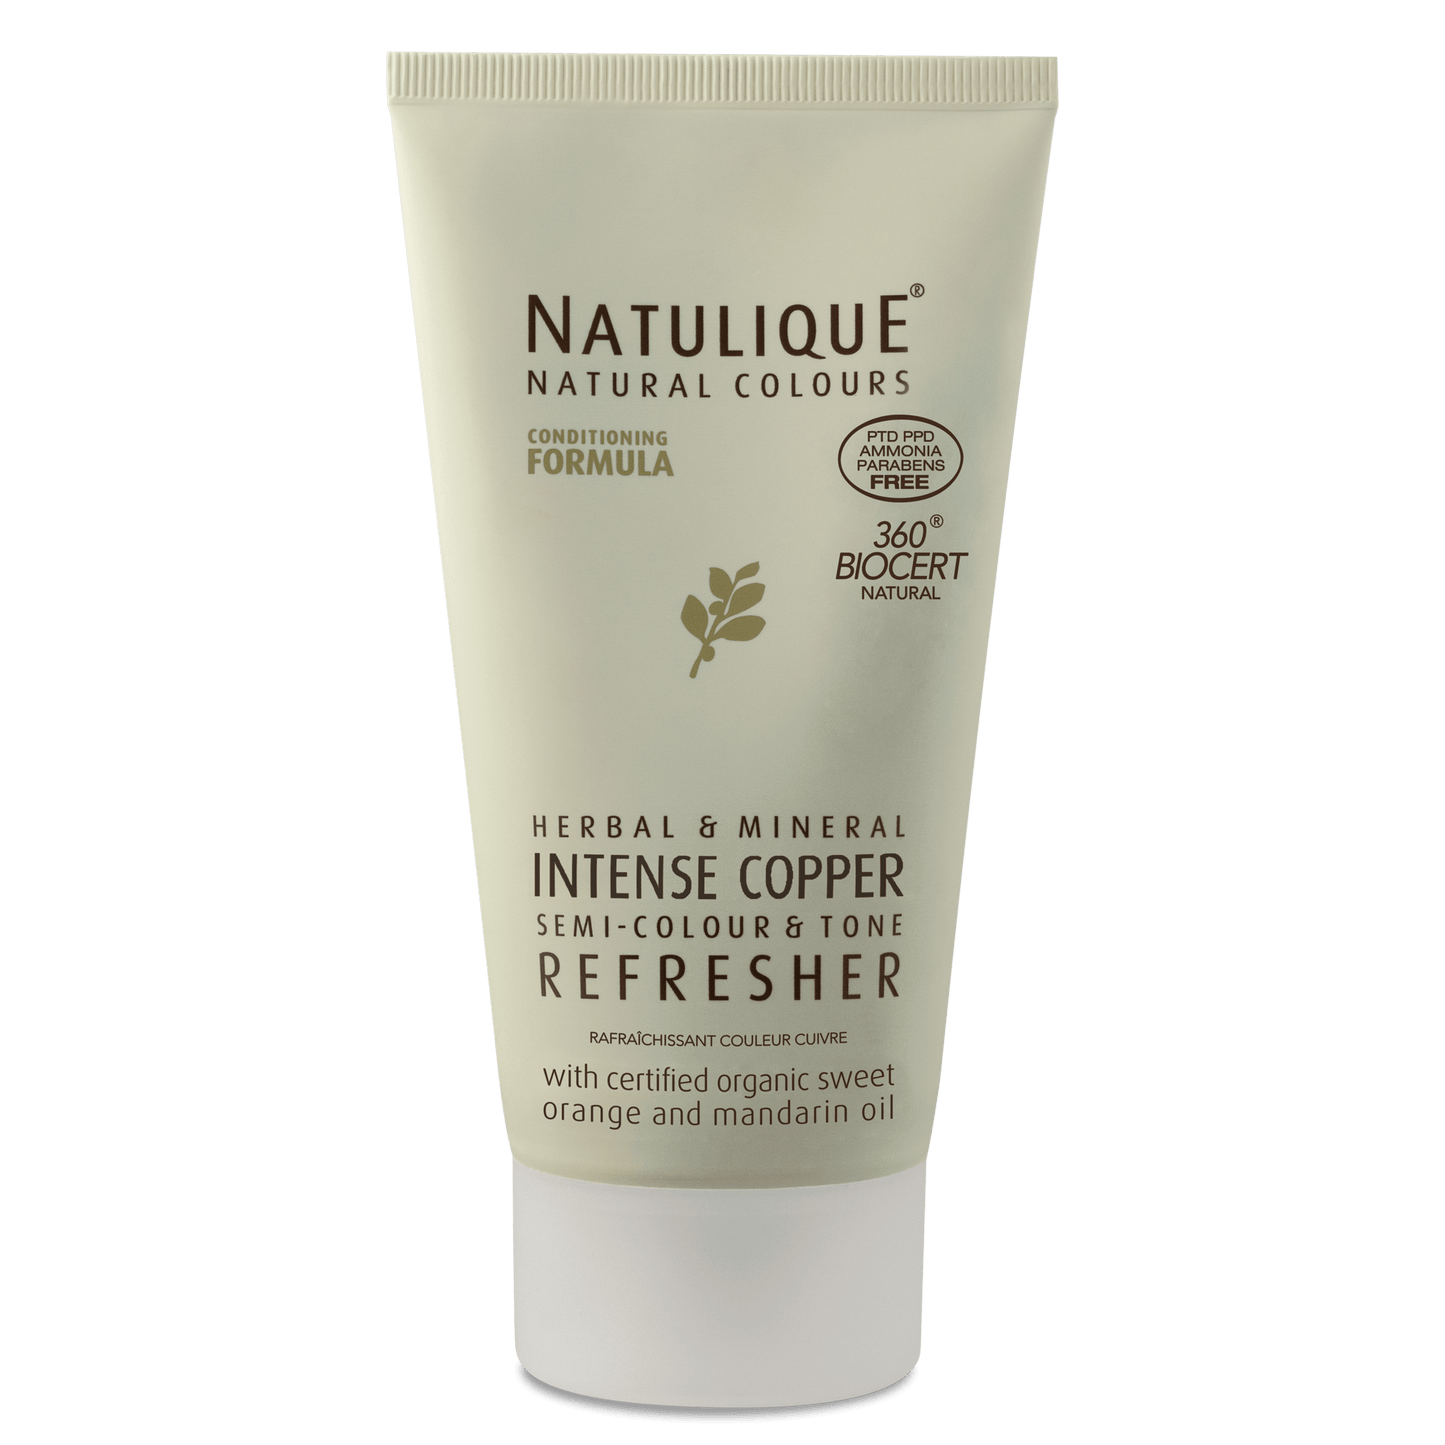 NATULIQUE NATURAL COLOUR REFRESHER INTENSE COPPER 150 ml - DAMICE Hair & Nails